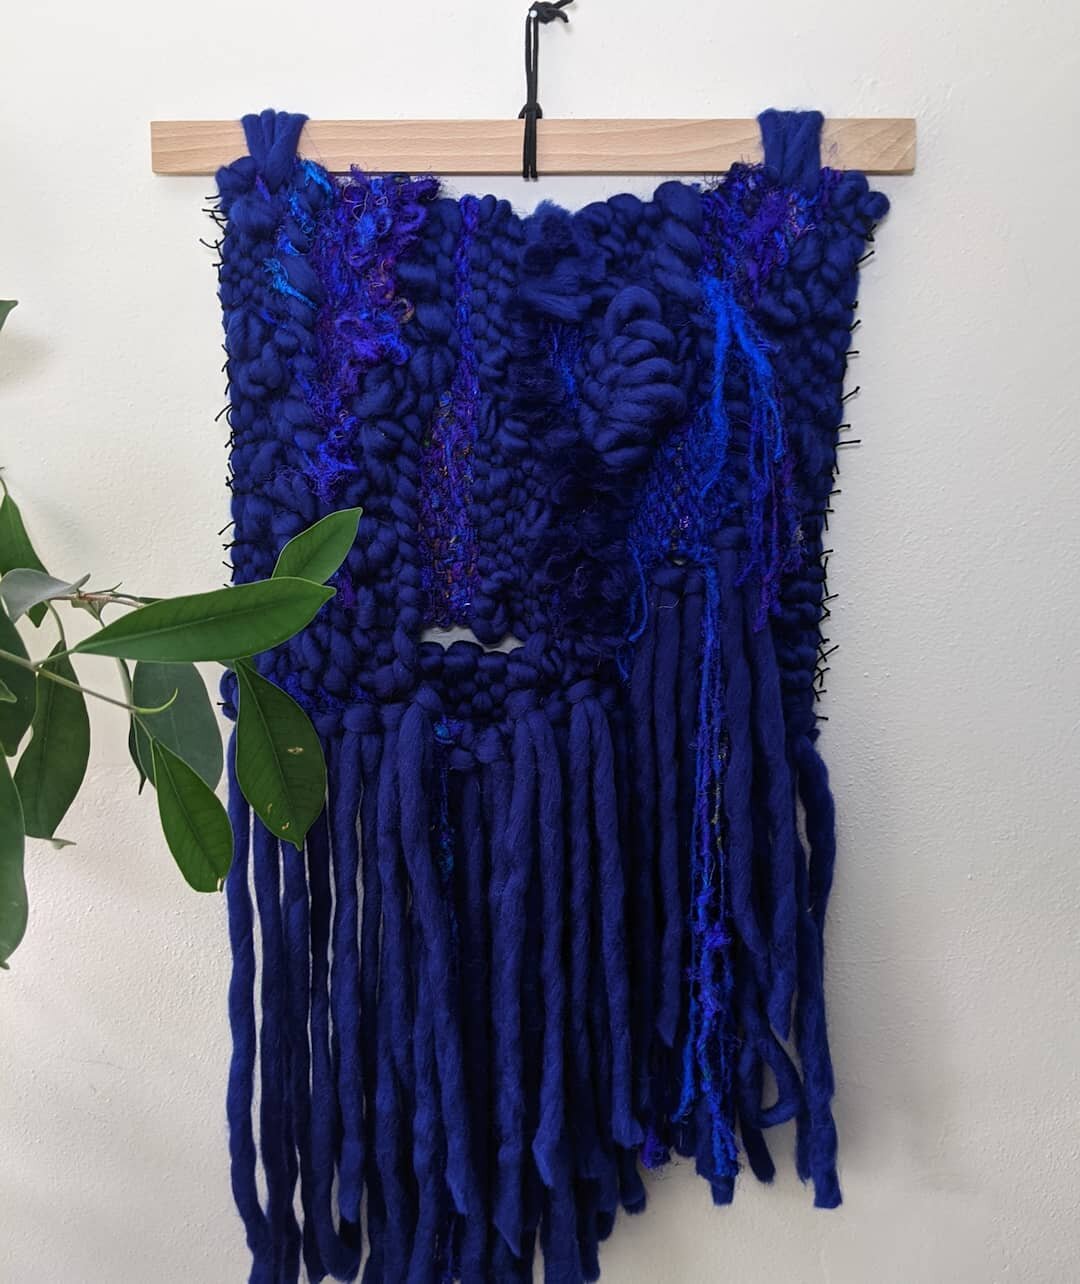 Also new and available now at Area 61, &quot;Blue By You&quot; 14&quot;x29&quot; sidewoven and blue AF. 
.
.
.
.
.
#wovenwallhanging
#handwoven
#soblue
#modernweaving
#color
#texture
#chattanoogaart
#area61artist